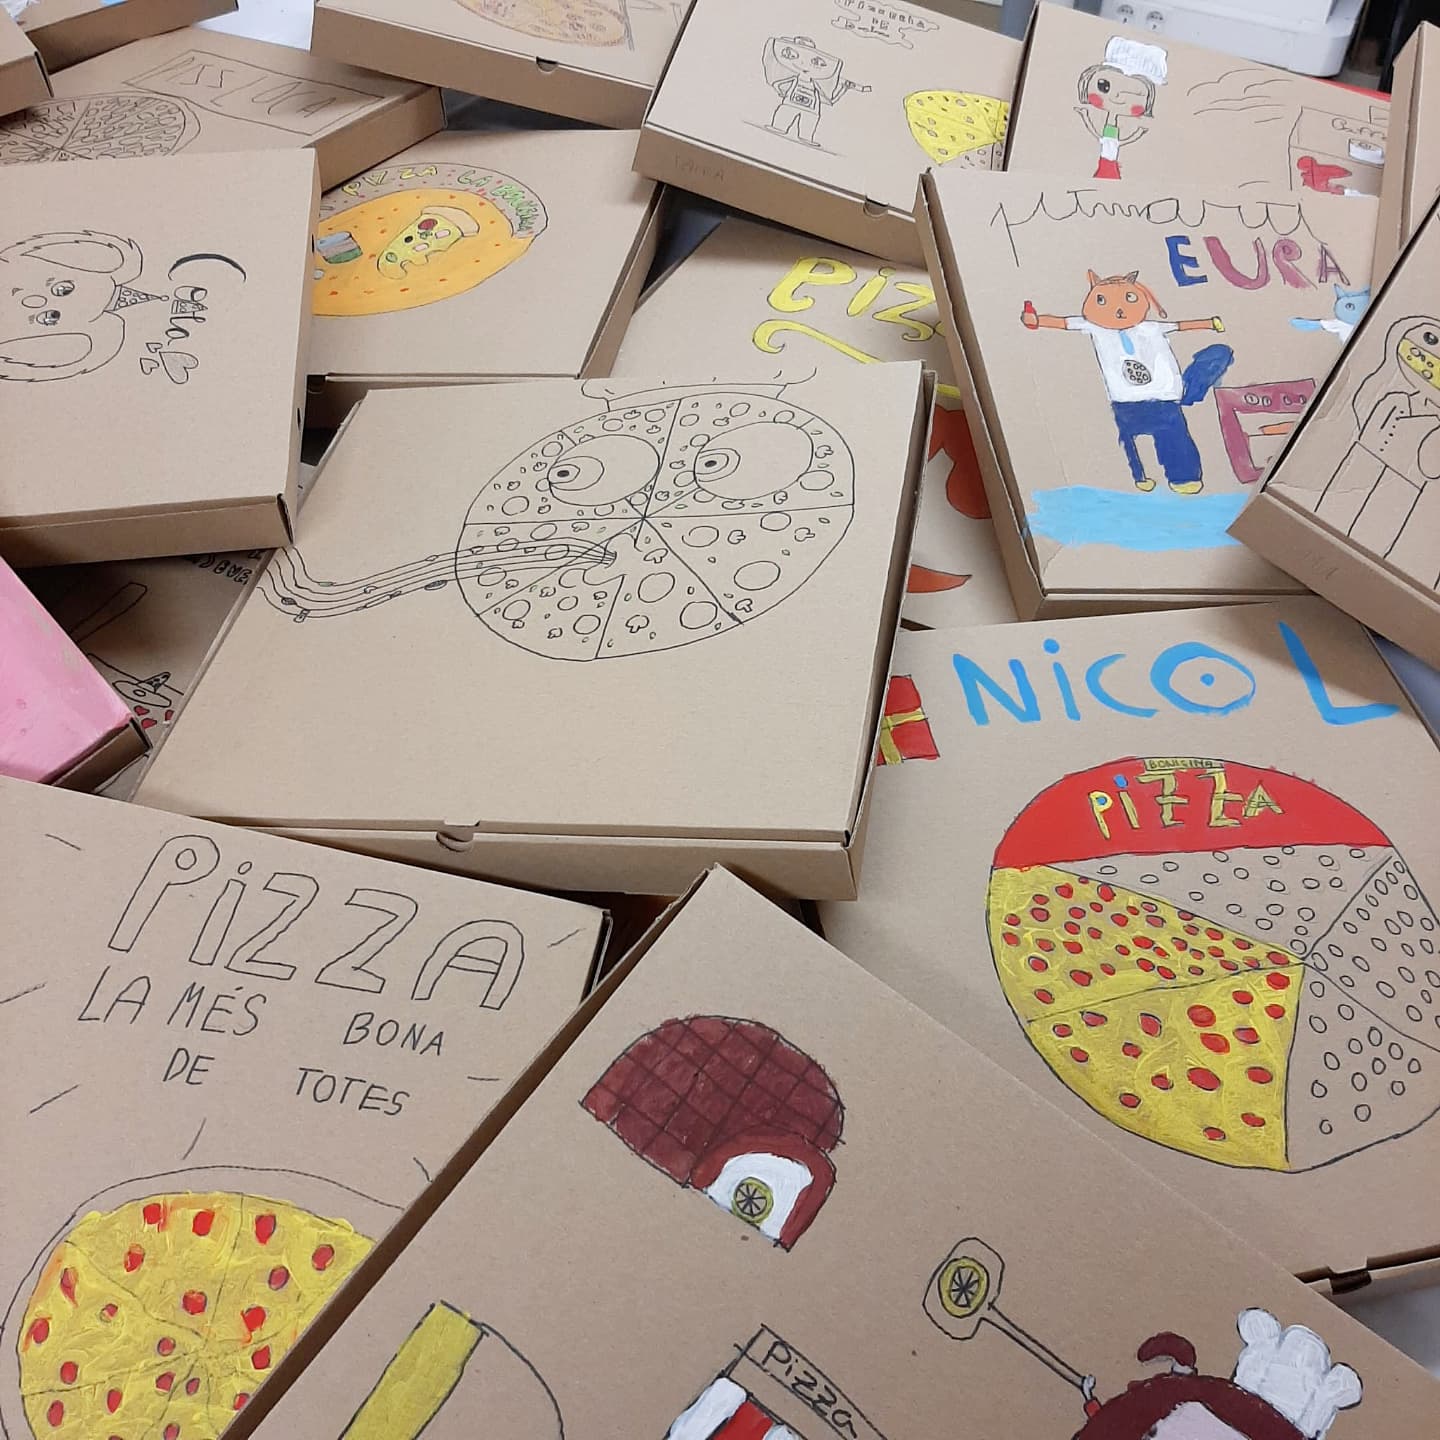 Final result of the pizza boxes